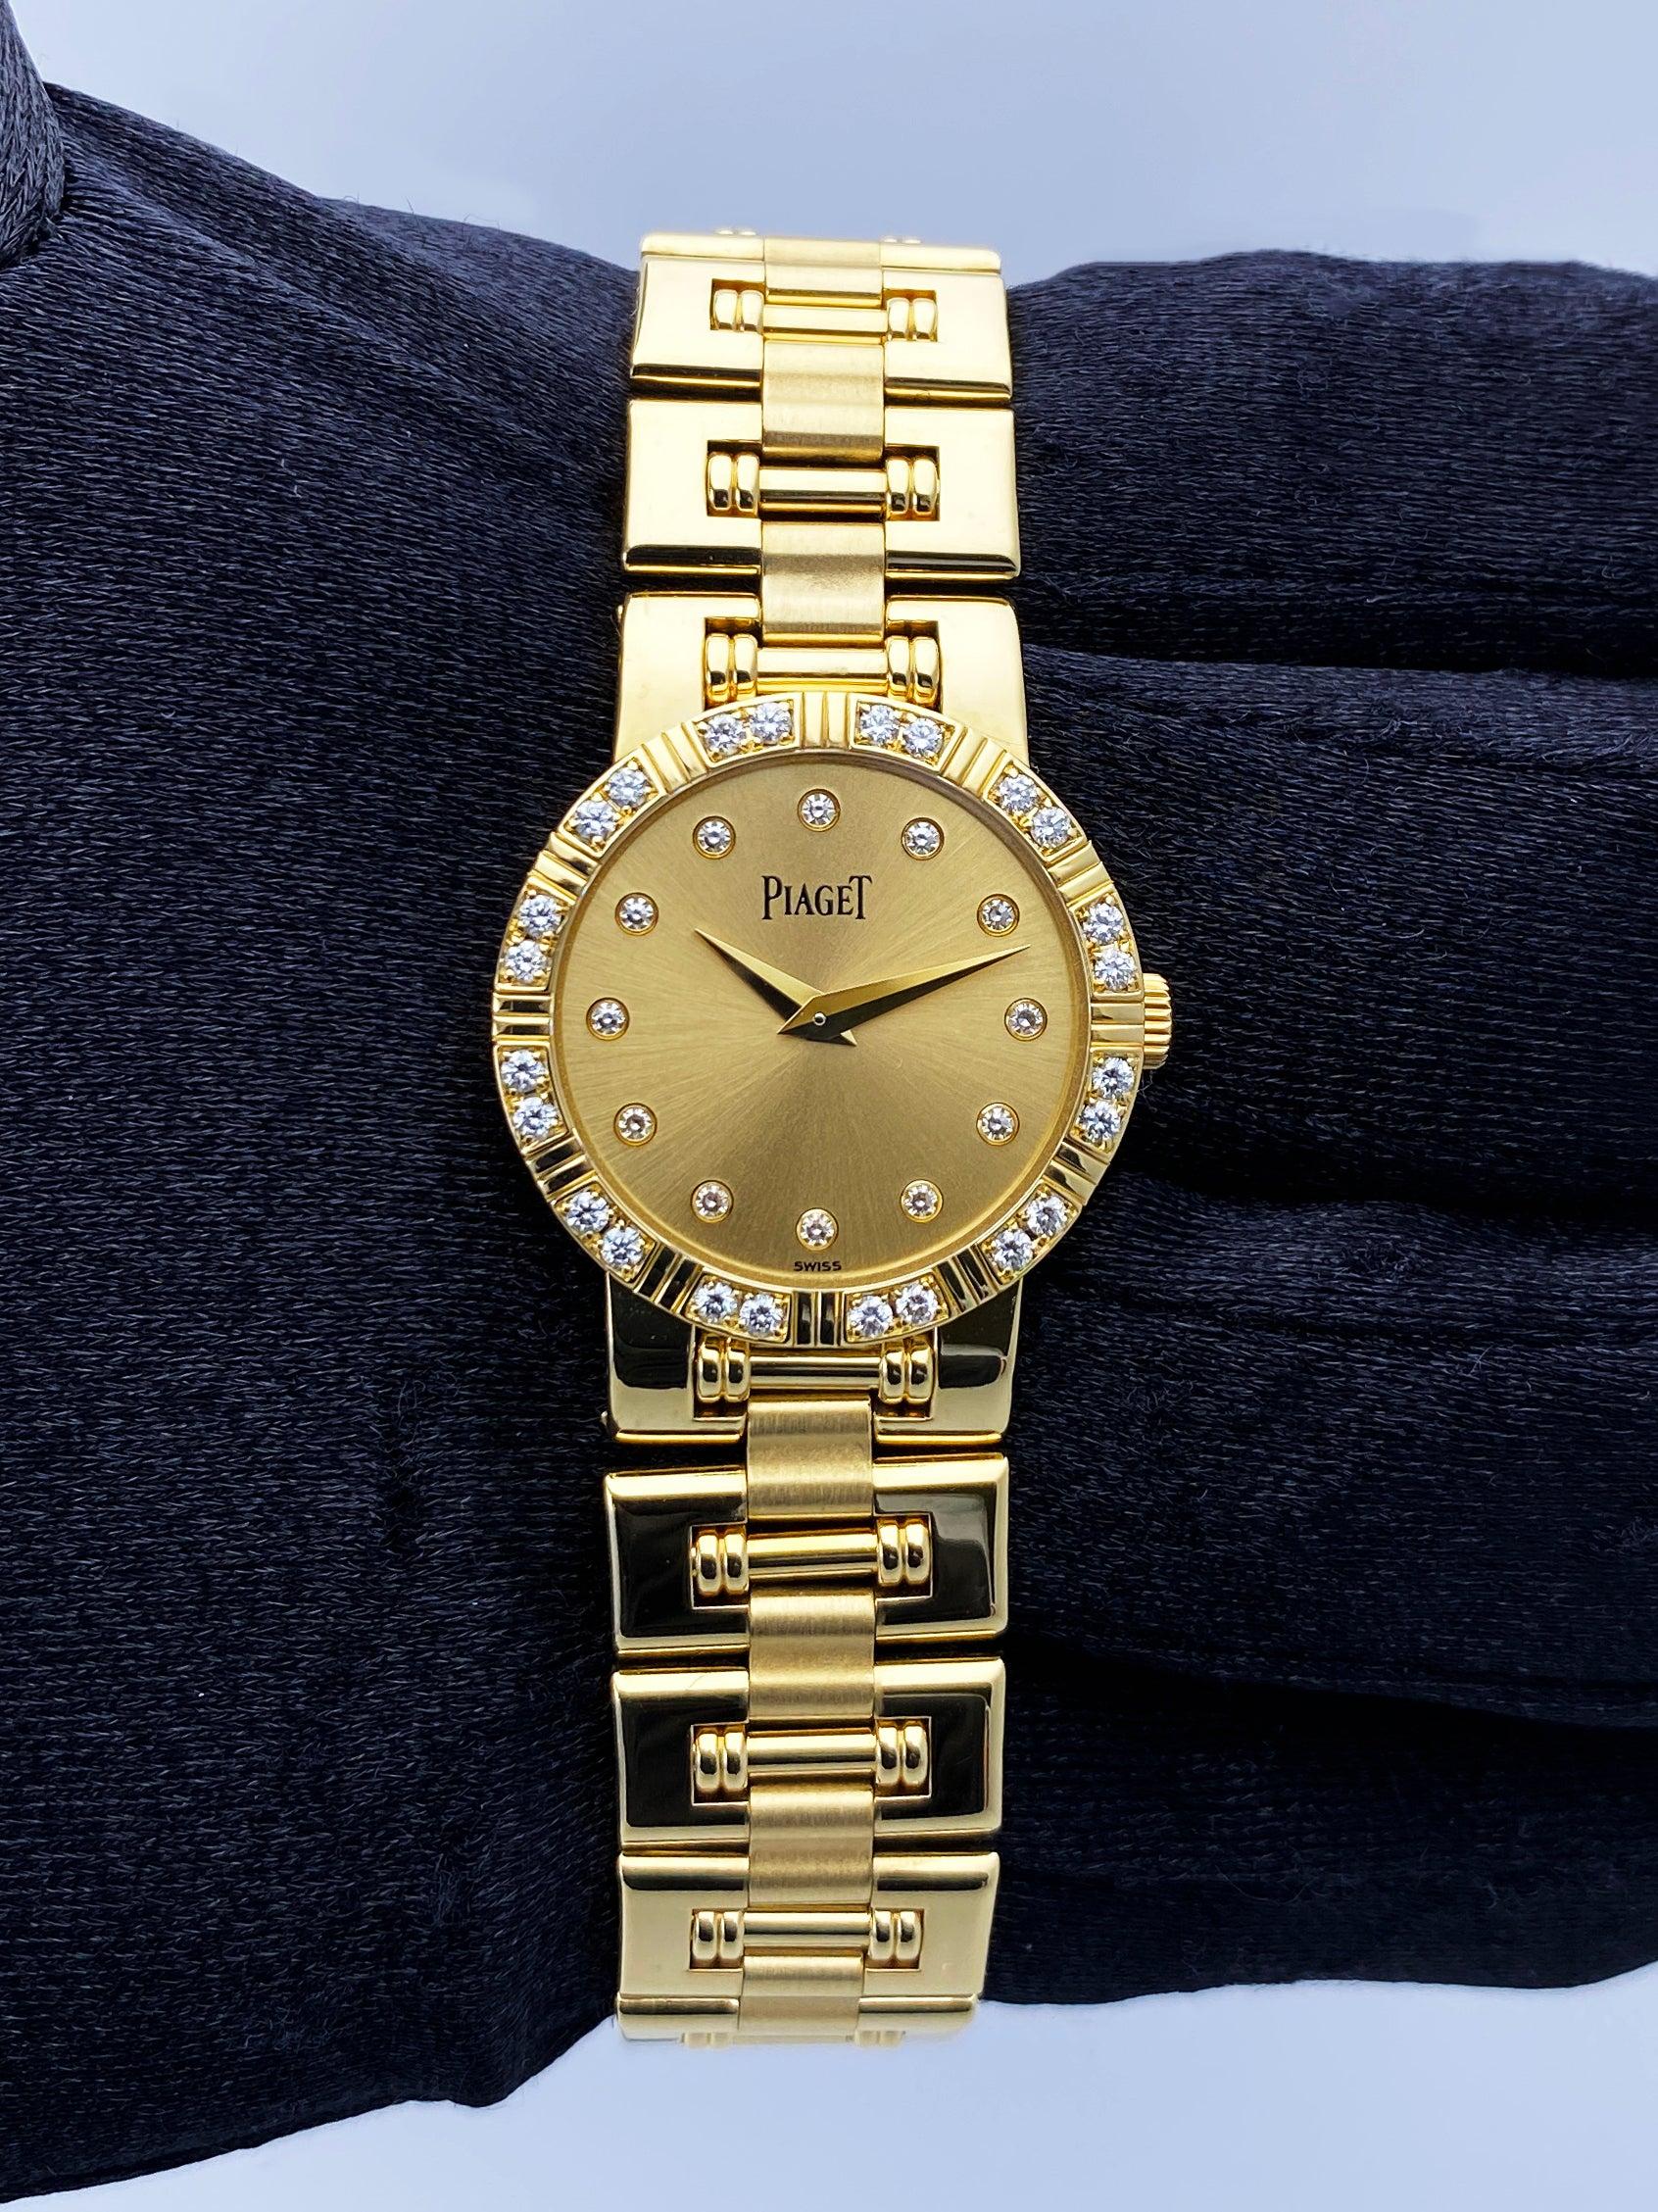 Piaget Dancer 80564 K81 Ladies Watch. 23mm 18K yellow gold case. 18K white gold bezel with original factory diamond insert. Champagne dial with gold hands and factory diamond hour markers. Date display at 3 o'clock position. 18K yellow gold bracelet